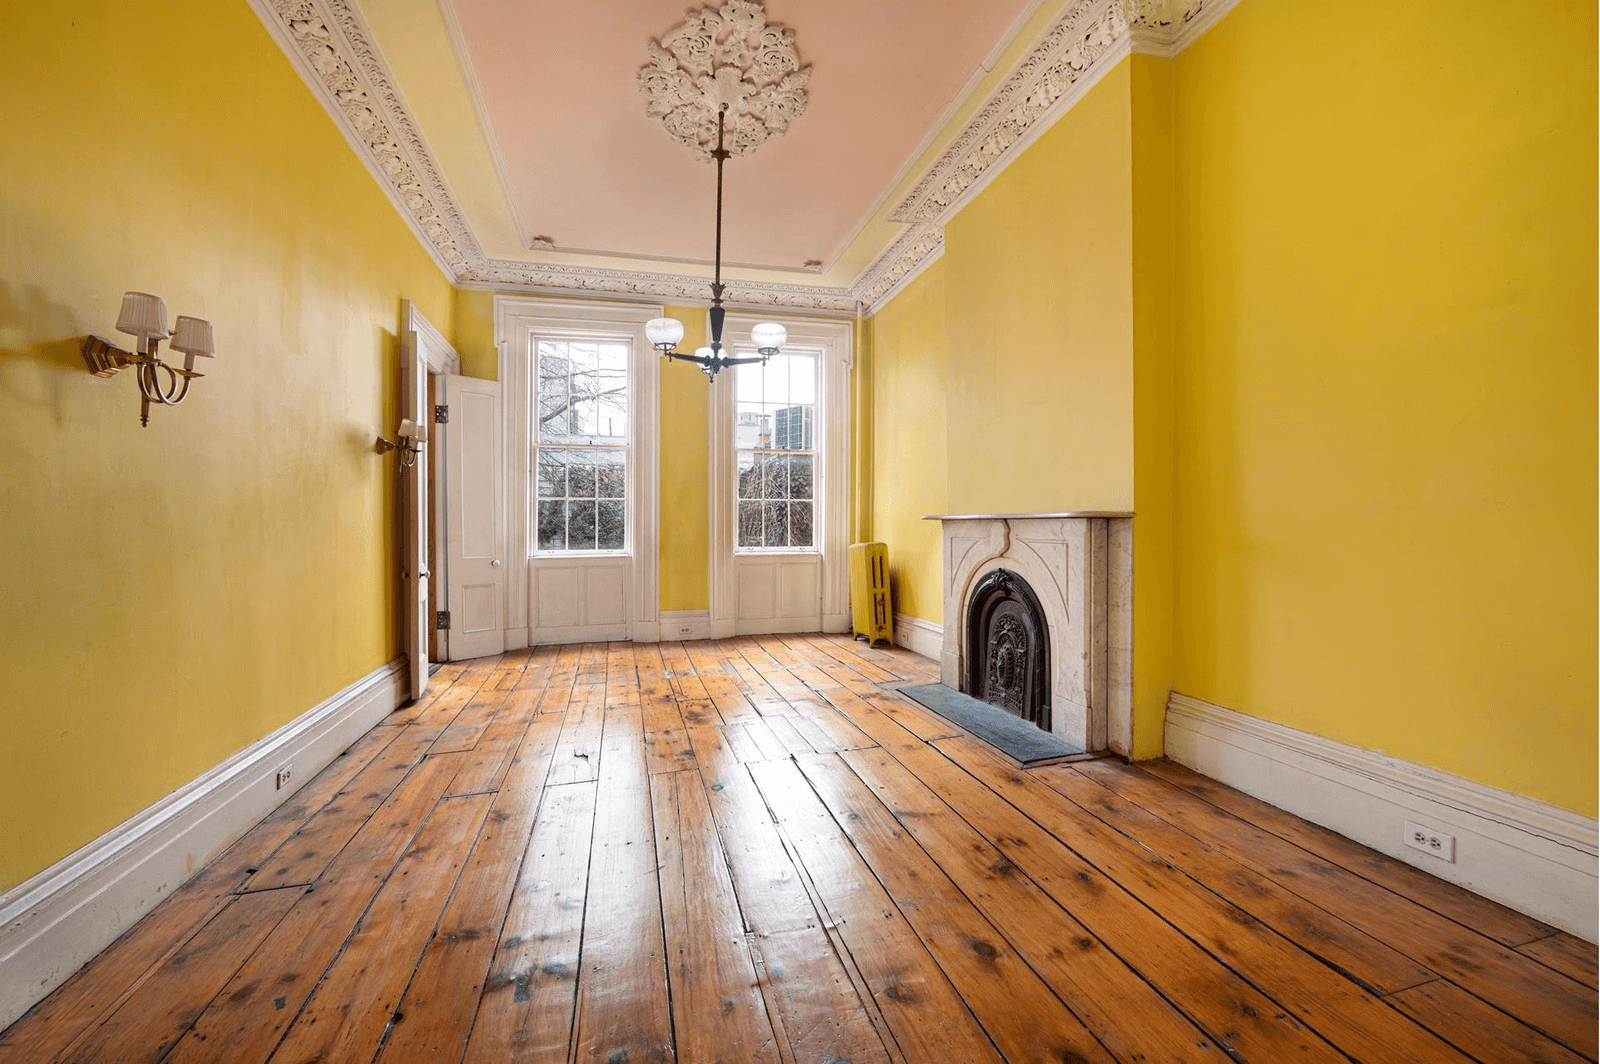 parlor with plasterwork and marble mantel